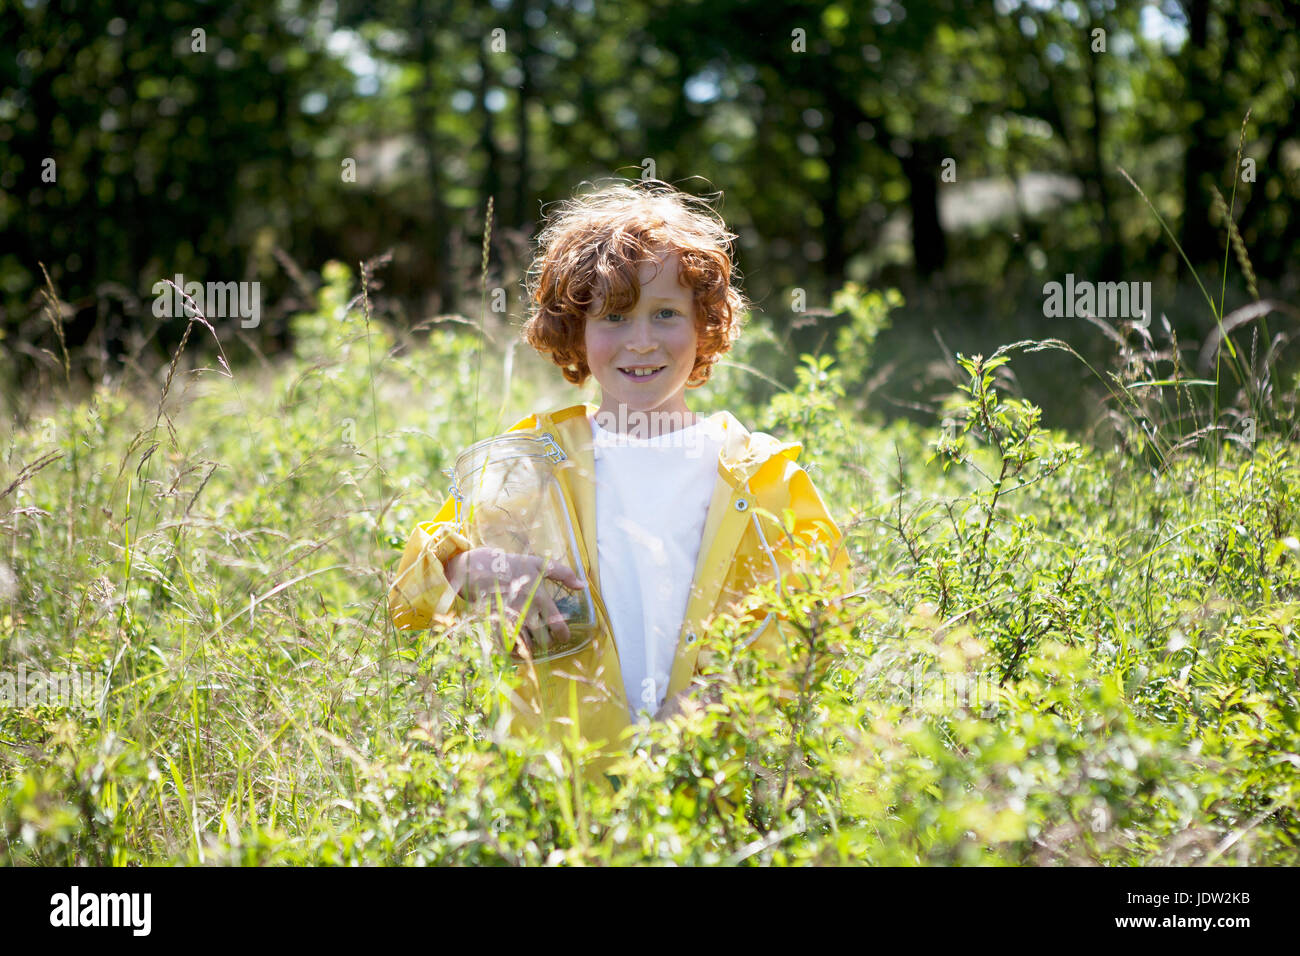 Girl standing in field of tall grass Stock Photo